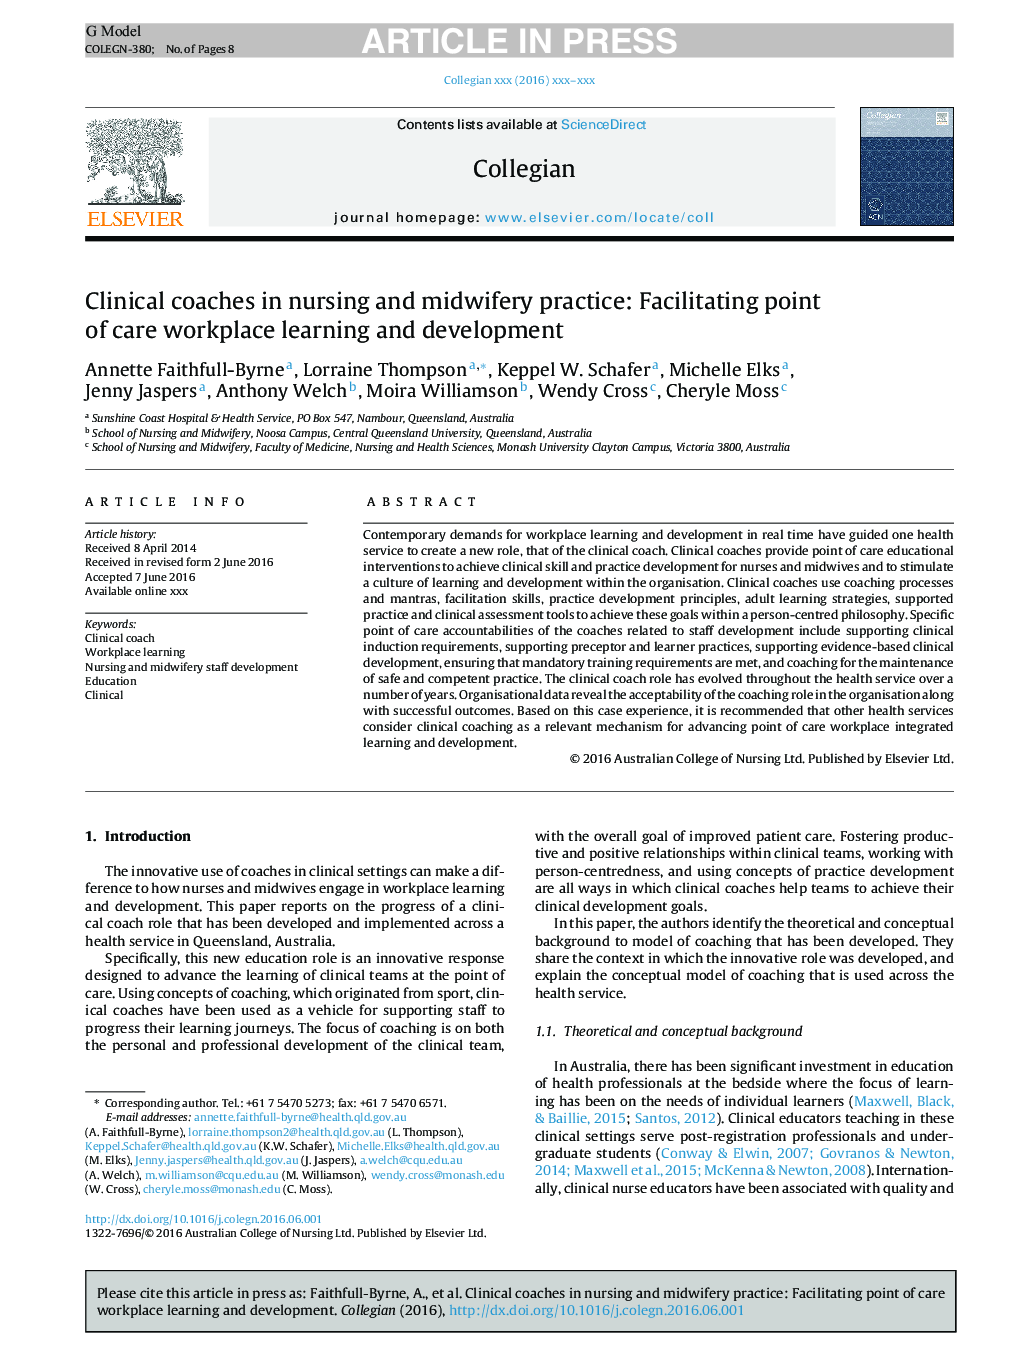 Clinical coaches in nursing and midwifery practice: Facilitating point of care workplace learning and development